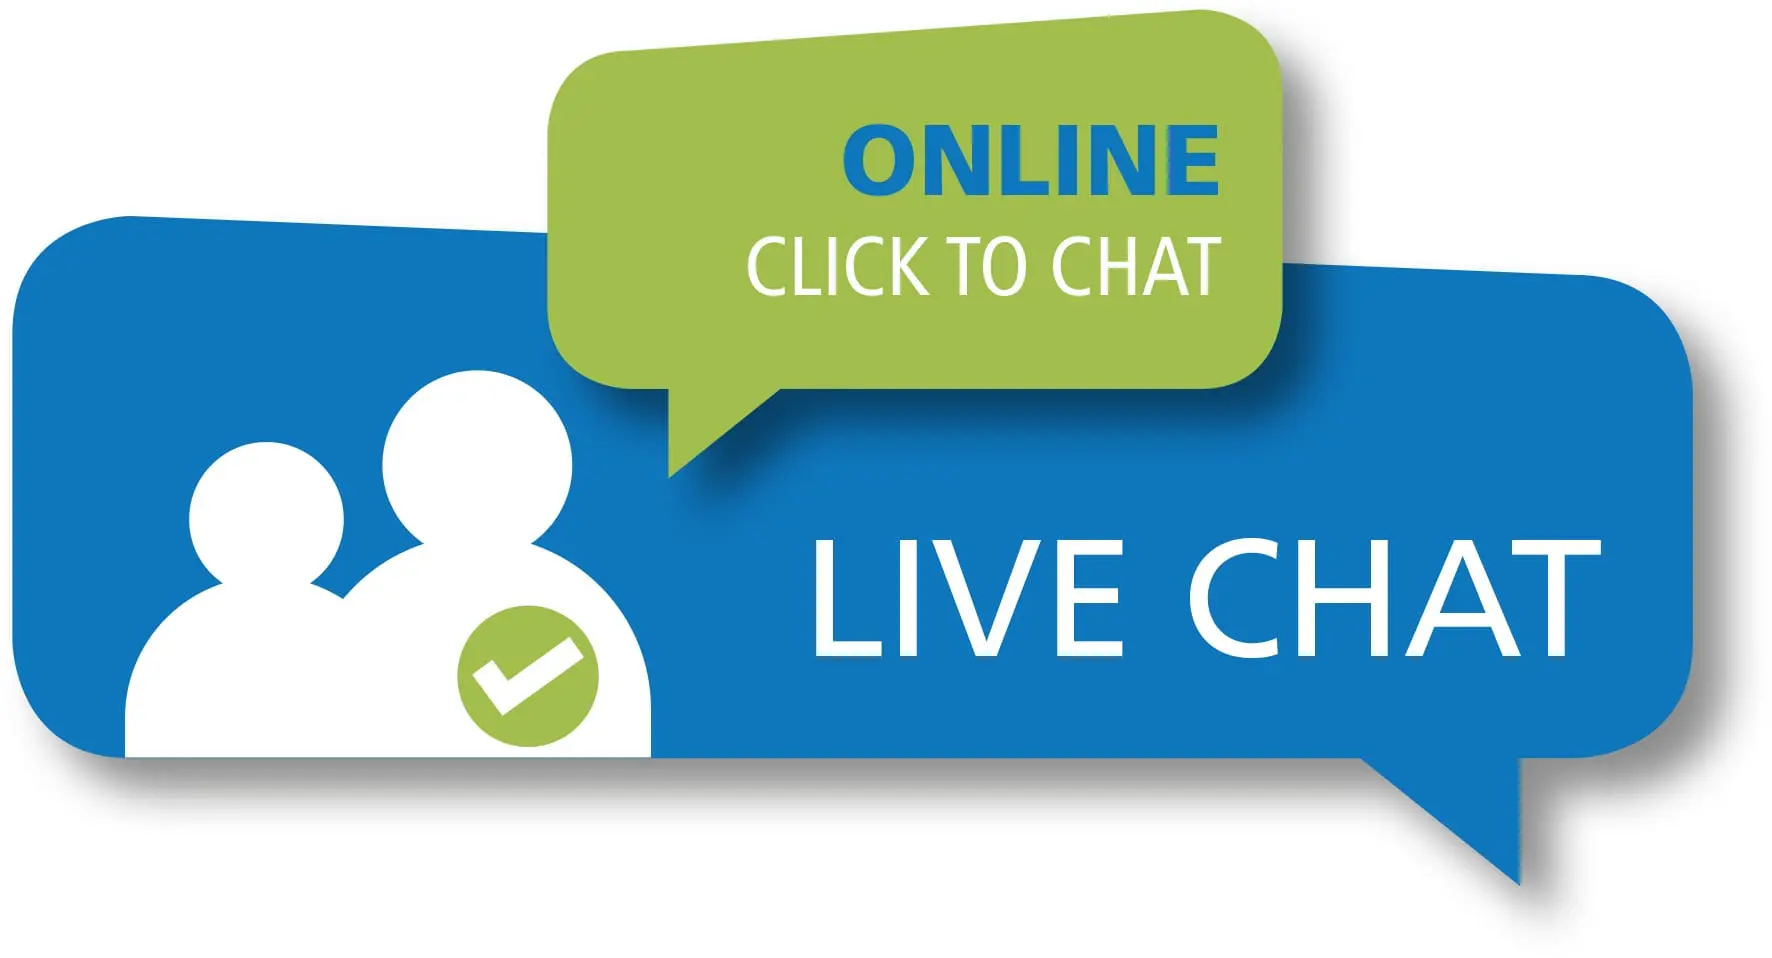 24/7 live chat support